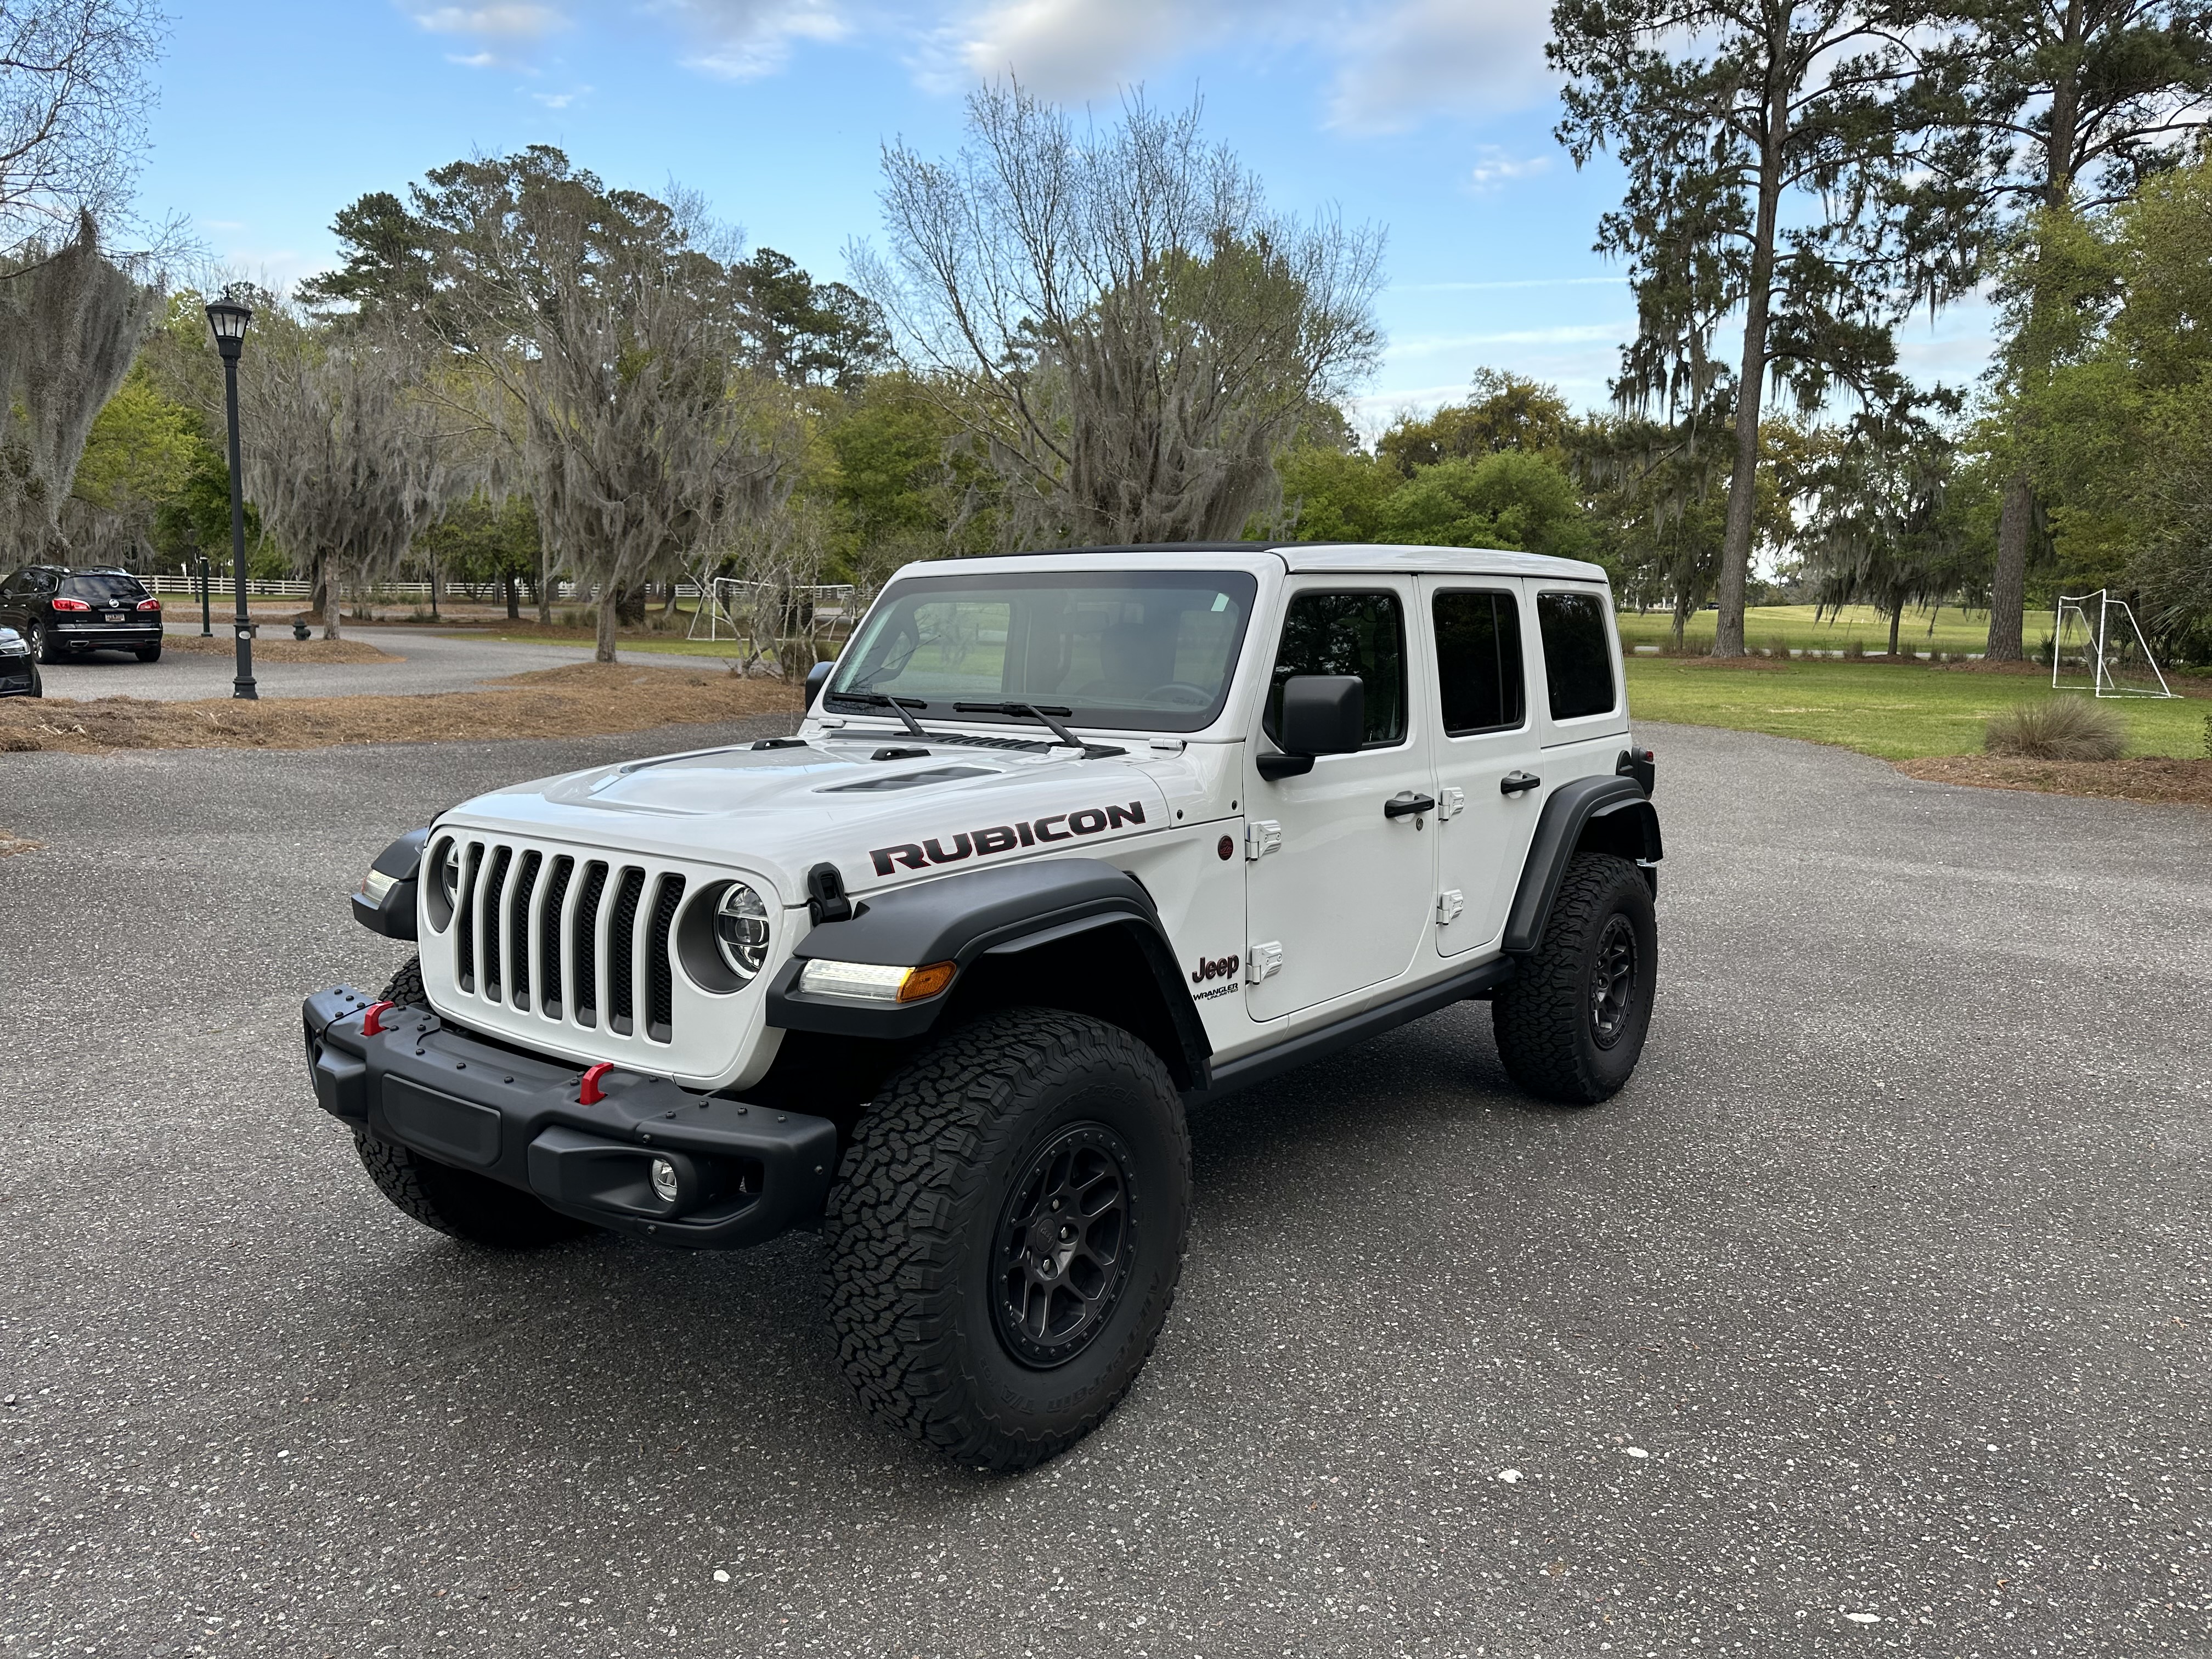 Used Jeep Wrangler Unlimited for Sale in Beaufort, SC 